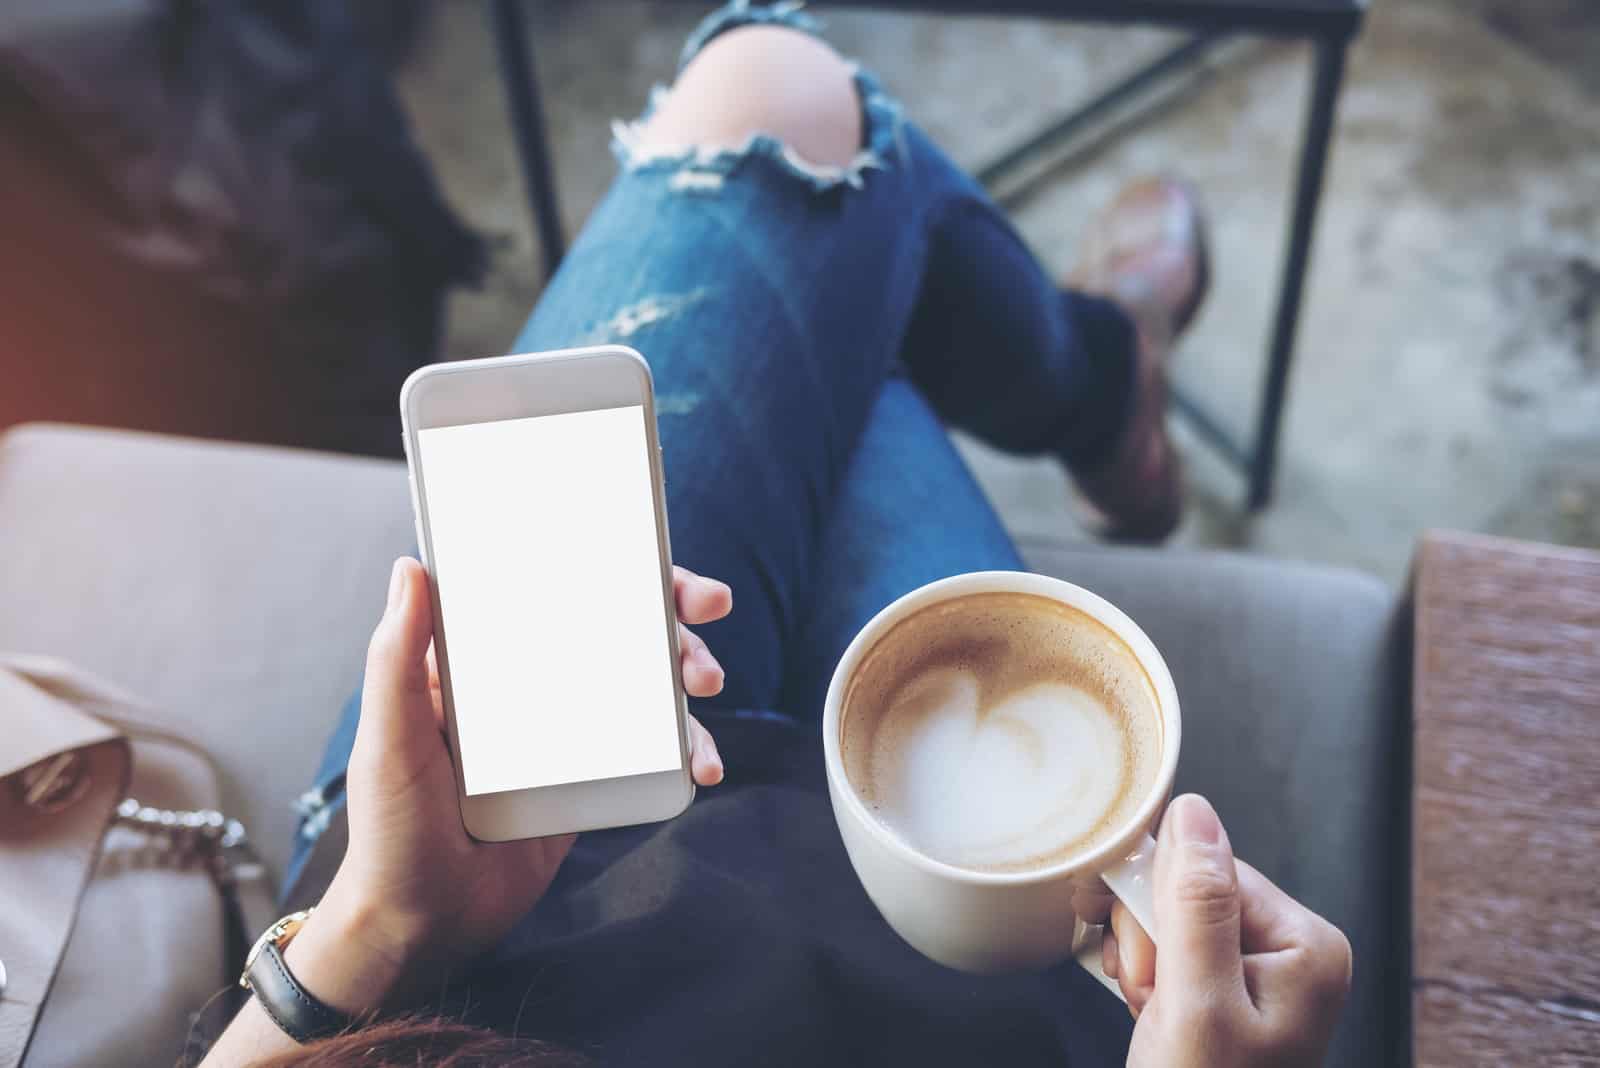 a woman sitting on the couch holding a phone and a cup of coffee in her hand